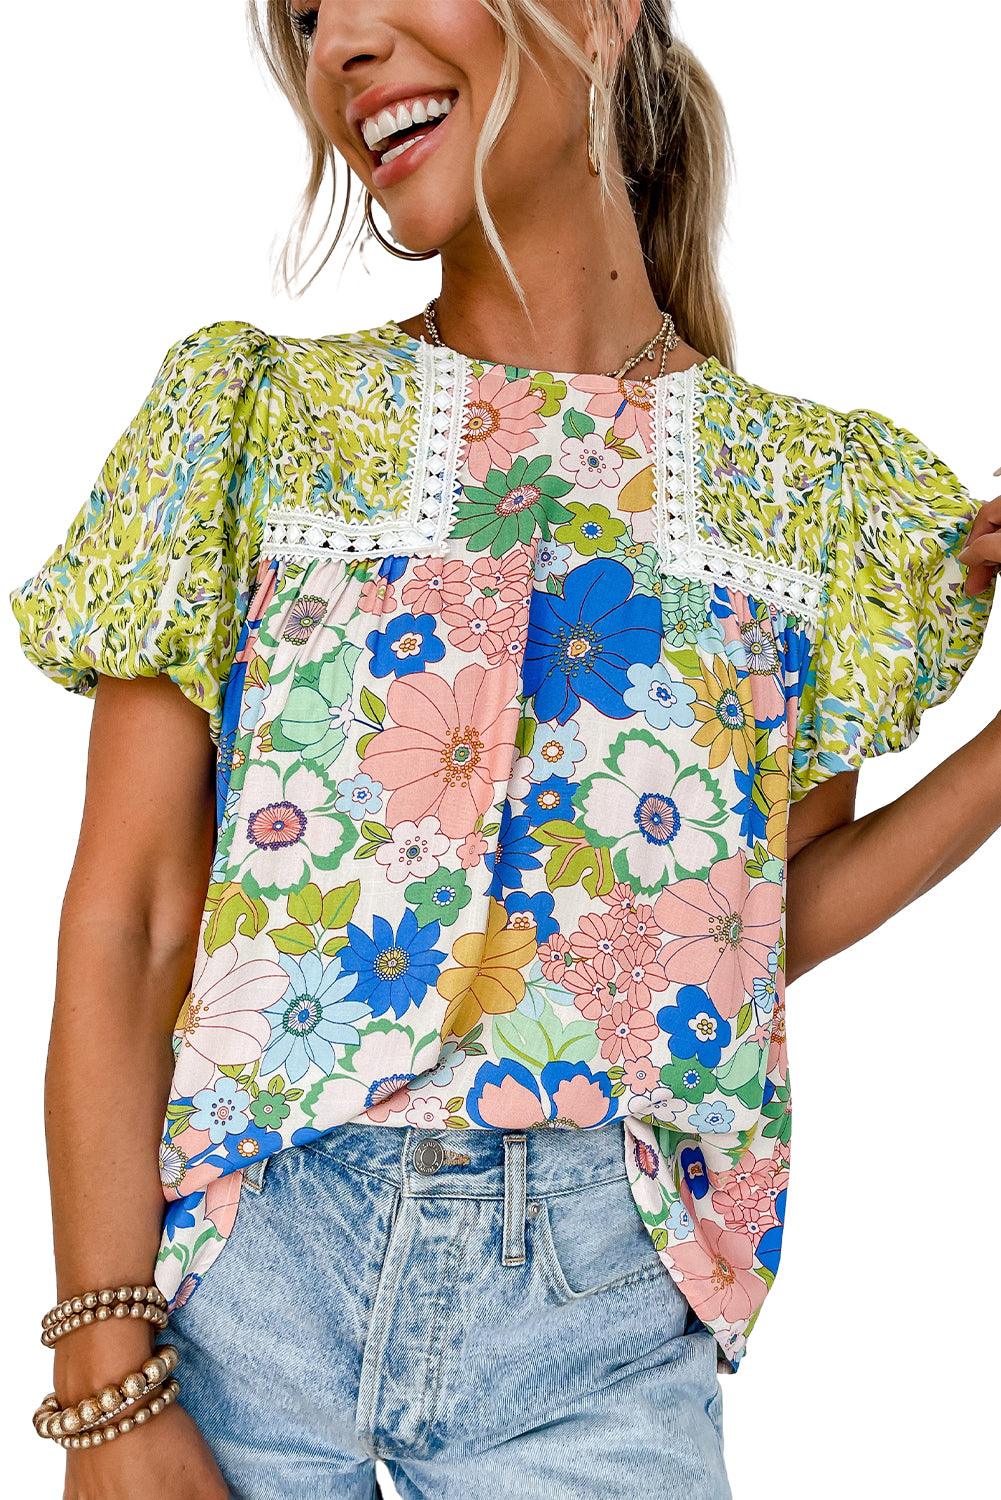 Green Bubble Sleeve Lace Trim Floral Mixed Print Blouse - L & M Kee, LLC